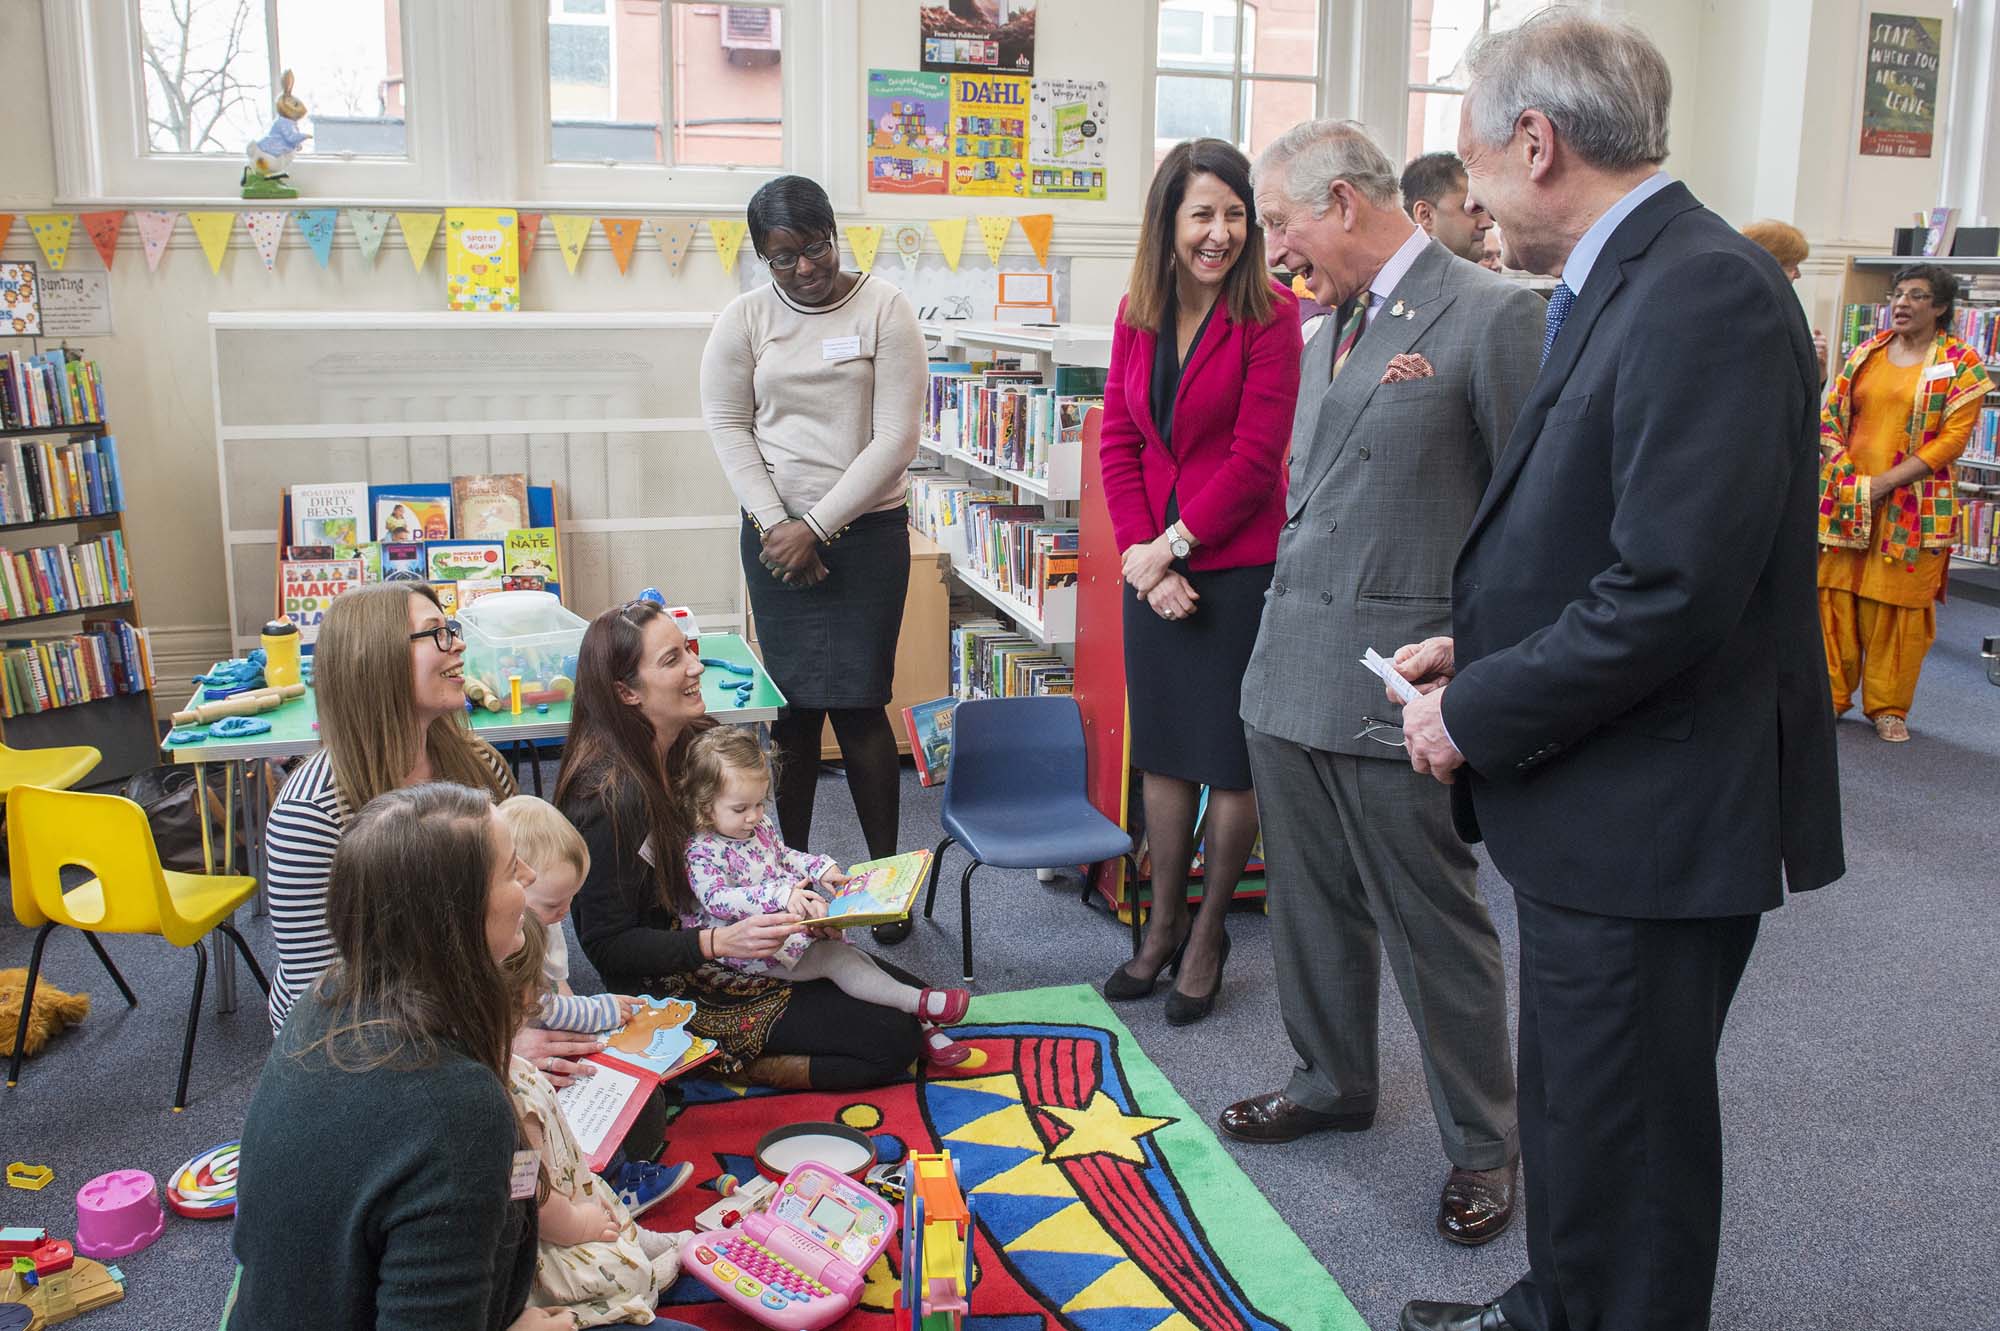 At Westcotes Library, Prince Charles met some young readers -